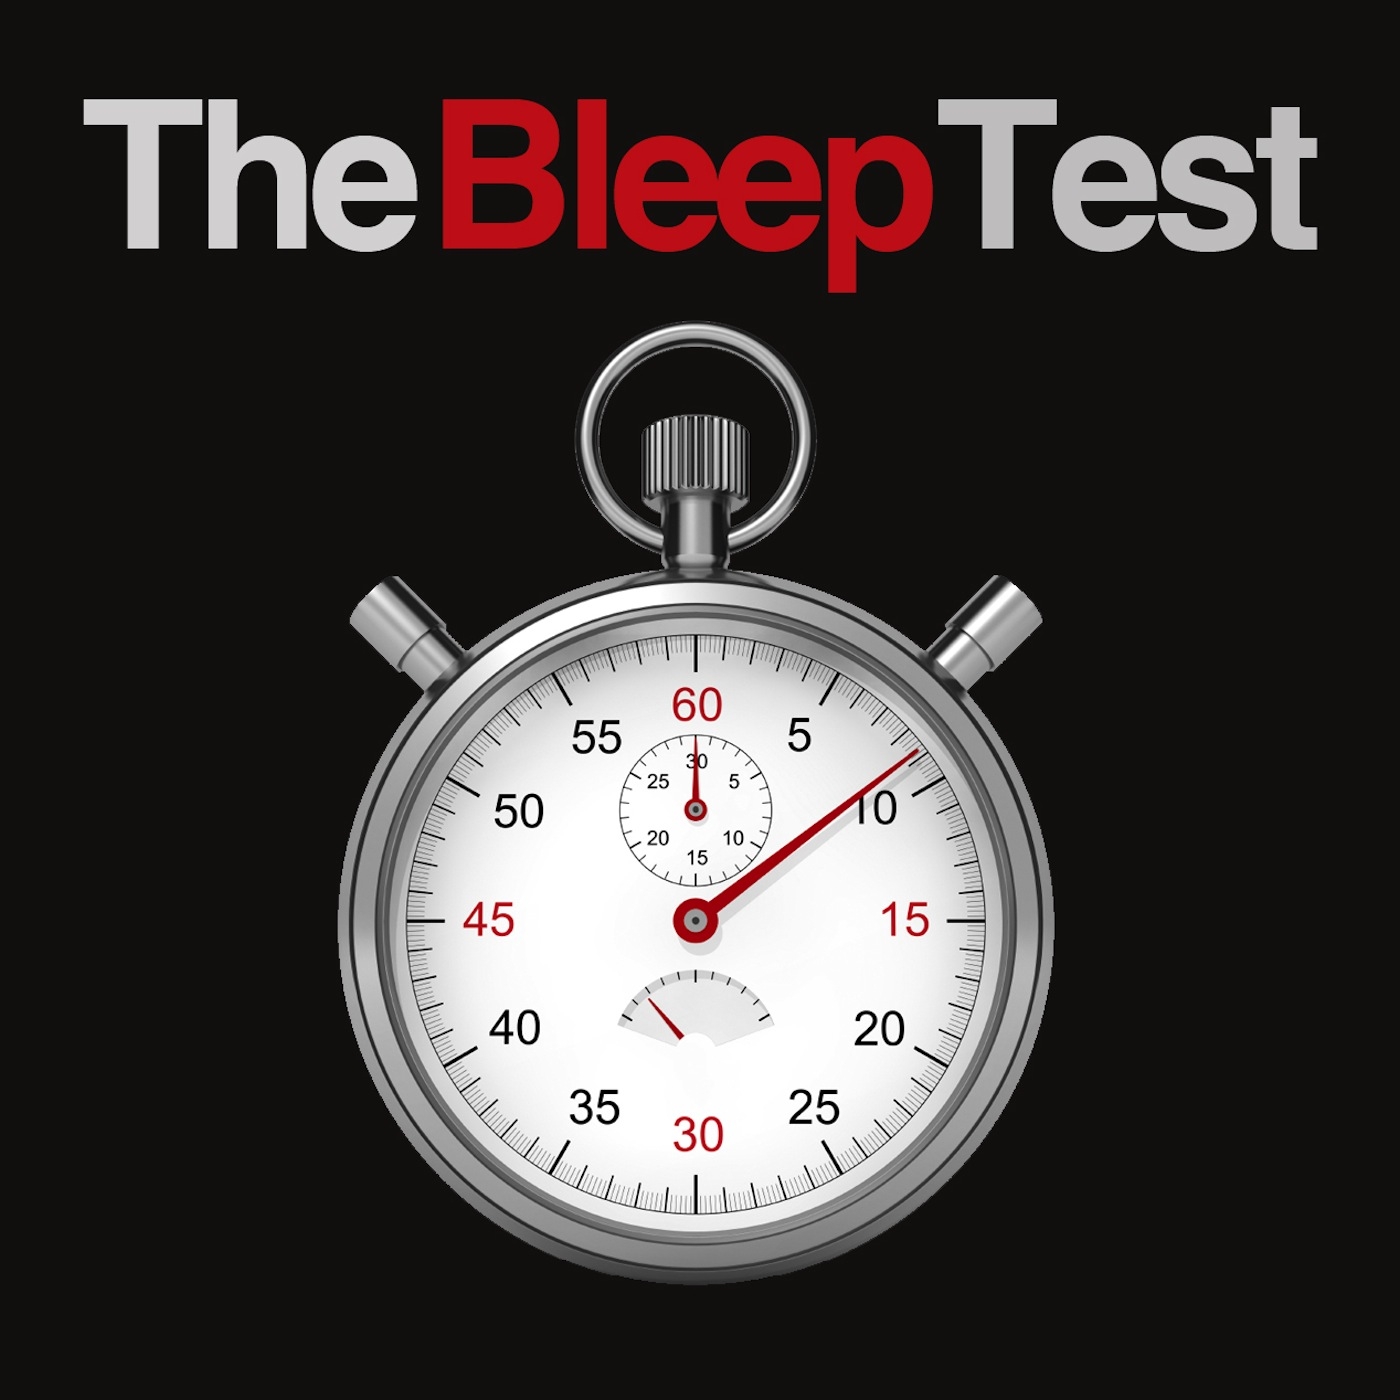 The Bleep Test: Instructions for the 15m Test